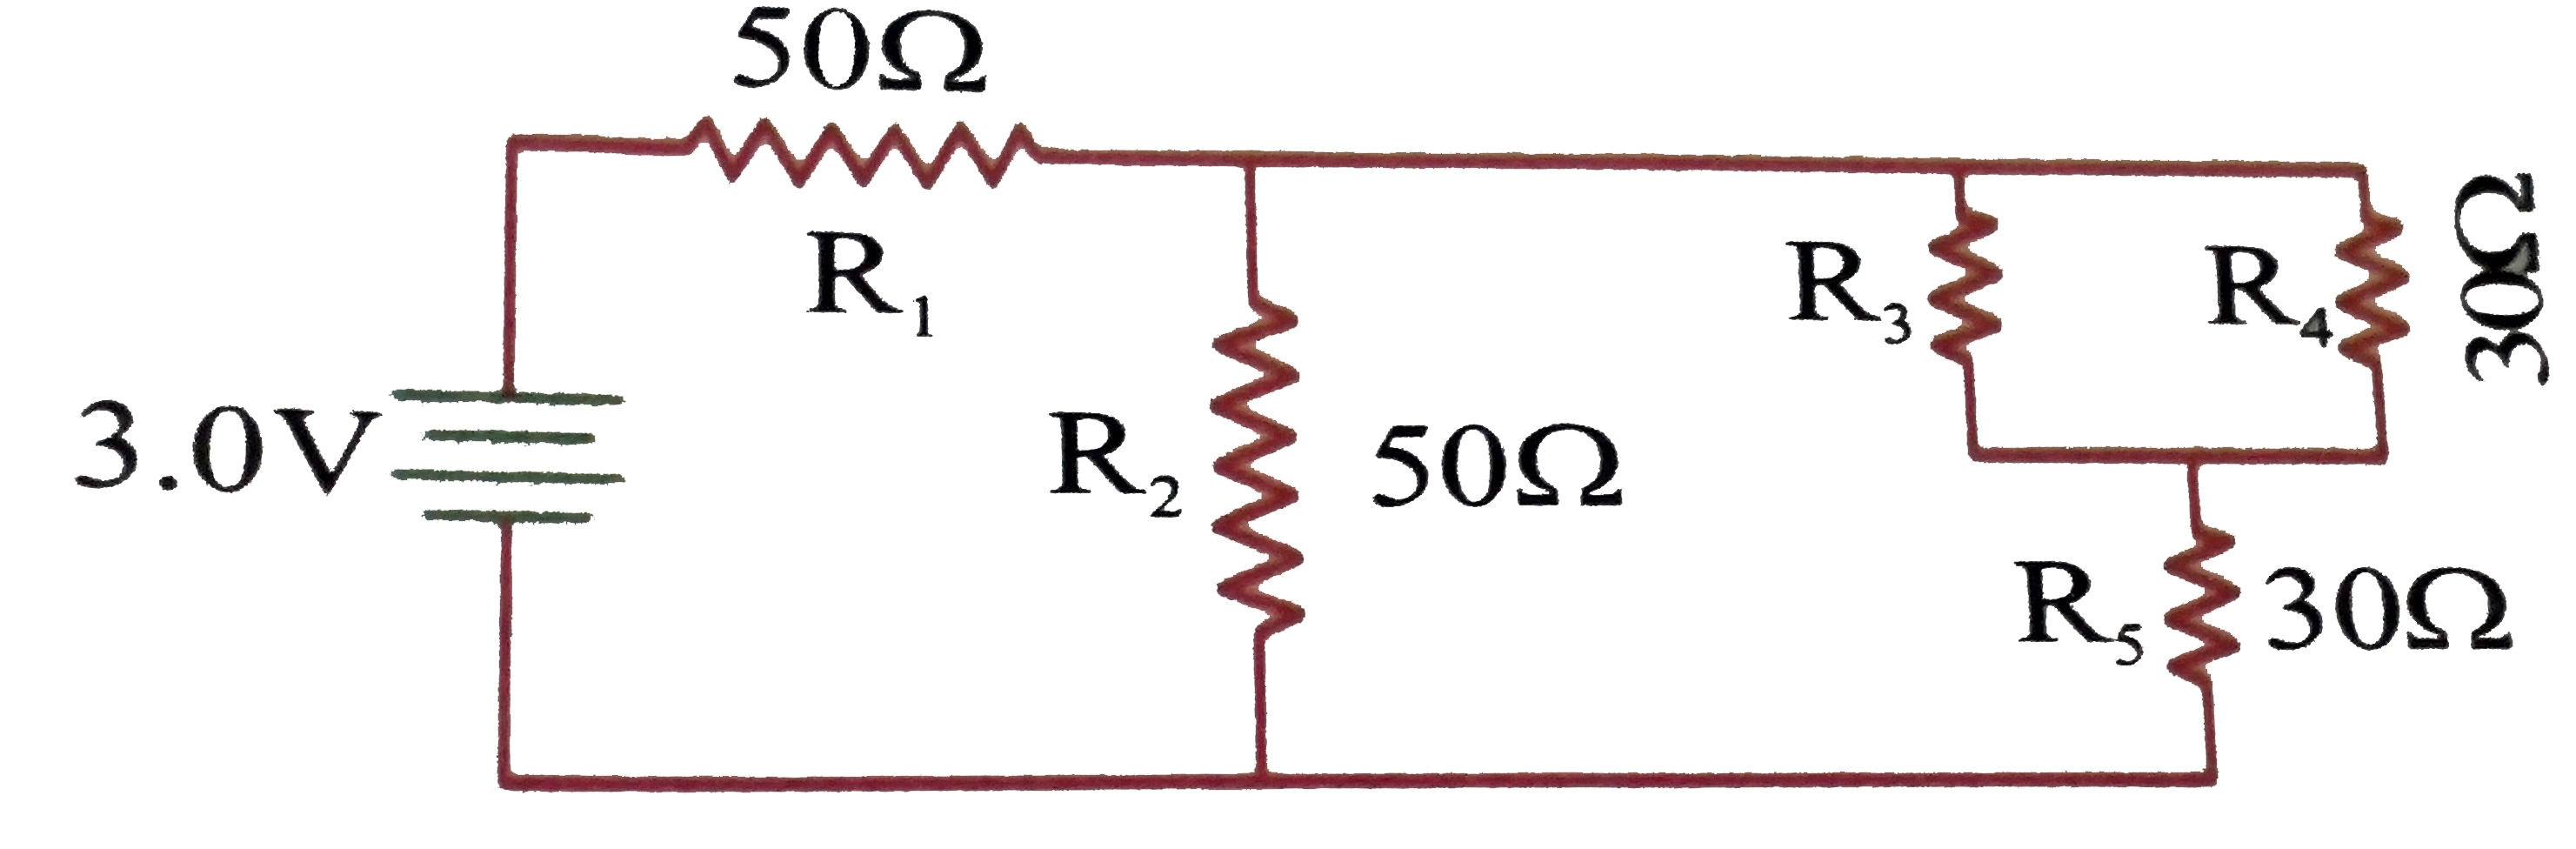 In the circuit shown, the resistances are given in ohms and the battery is assumed ideal withh emf equal to 3.0 volts.   Q. The resistor that dissipates maximum power